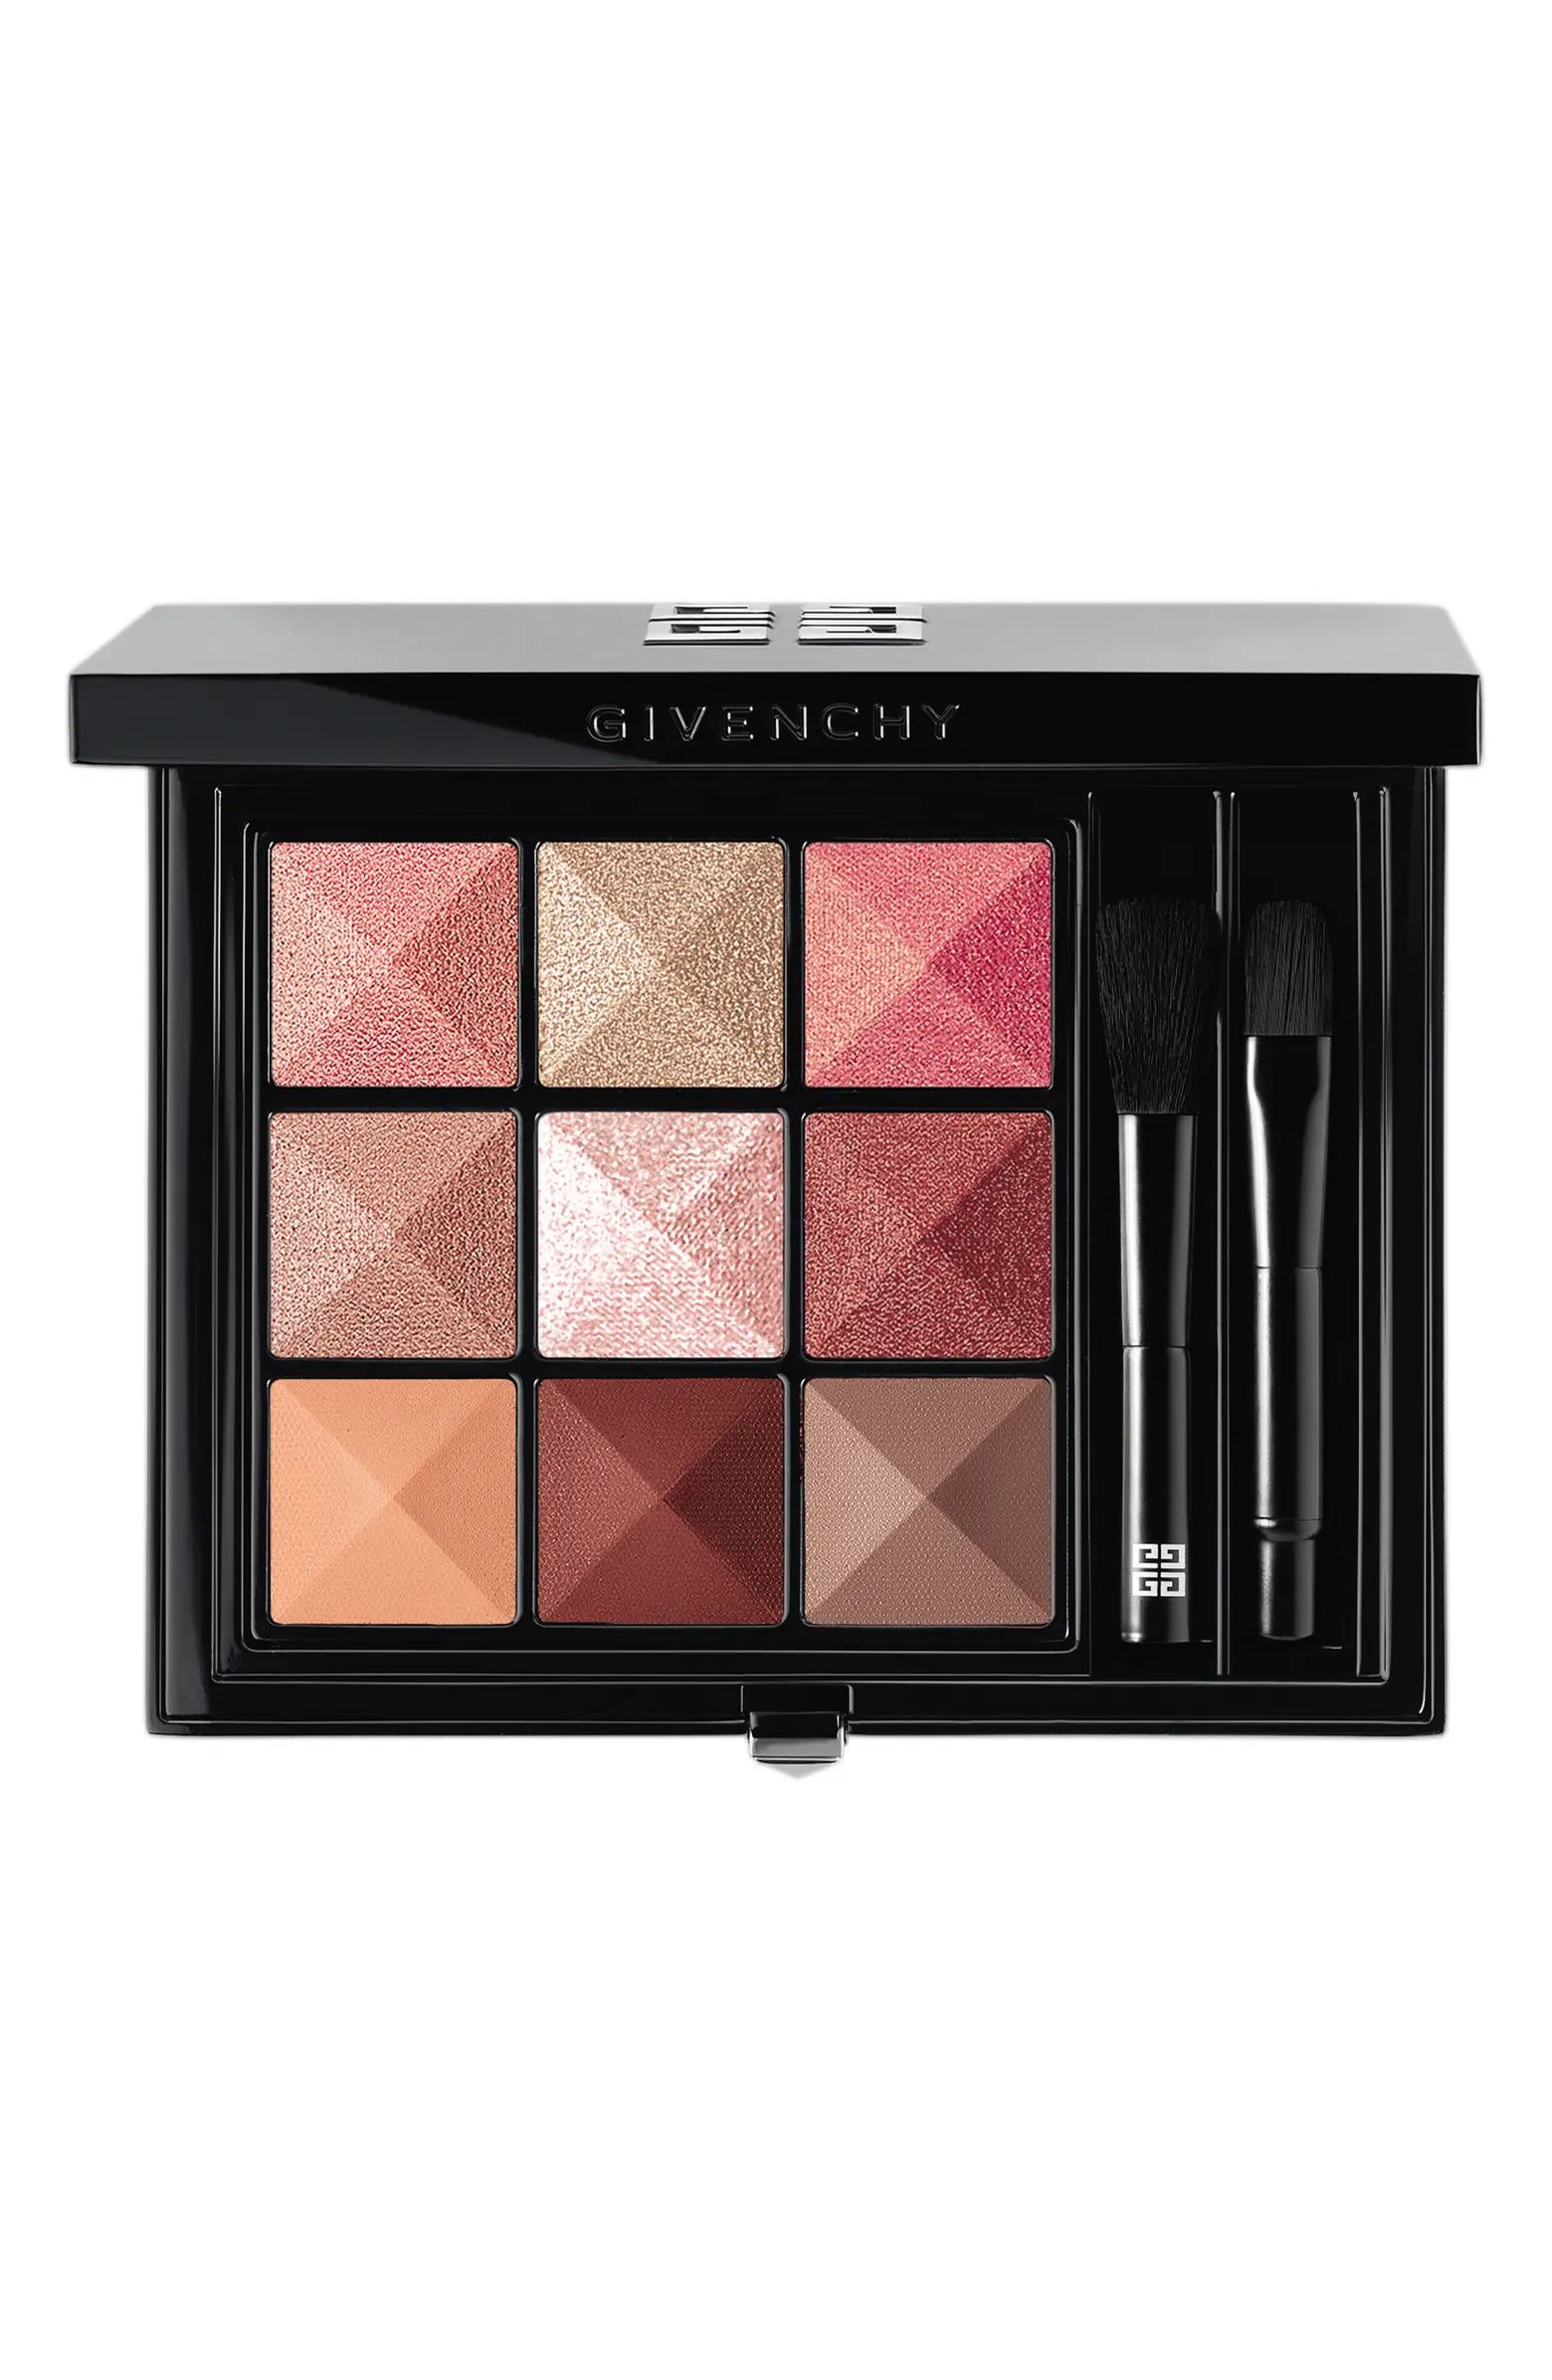 Le 9 de Givenchy Eyeshadow Palette | Nordstrom